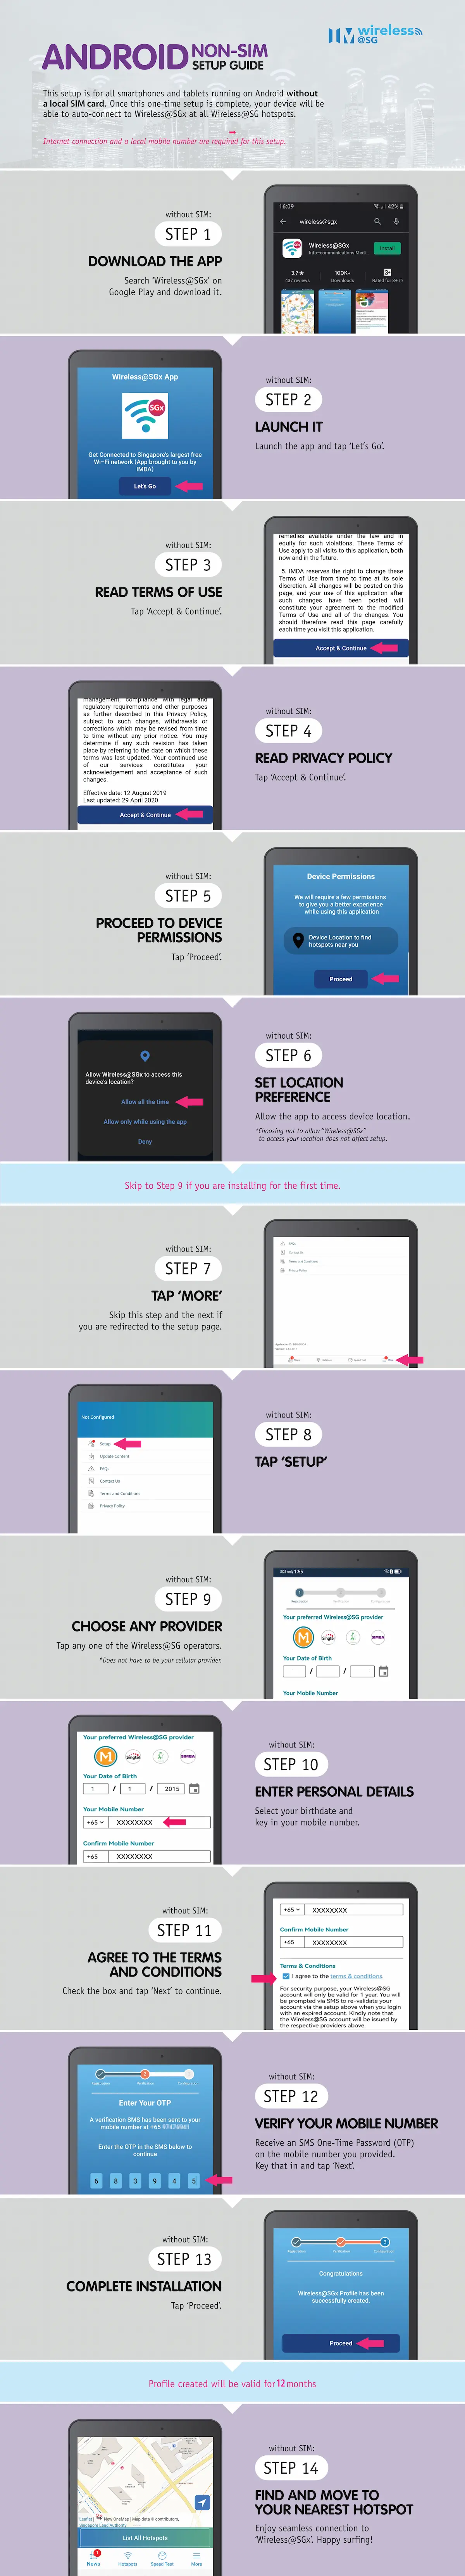 Wireless@SGx app step-by-step infographic setup guide for Android Non-SIM